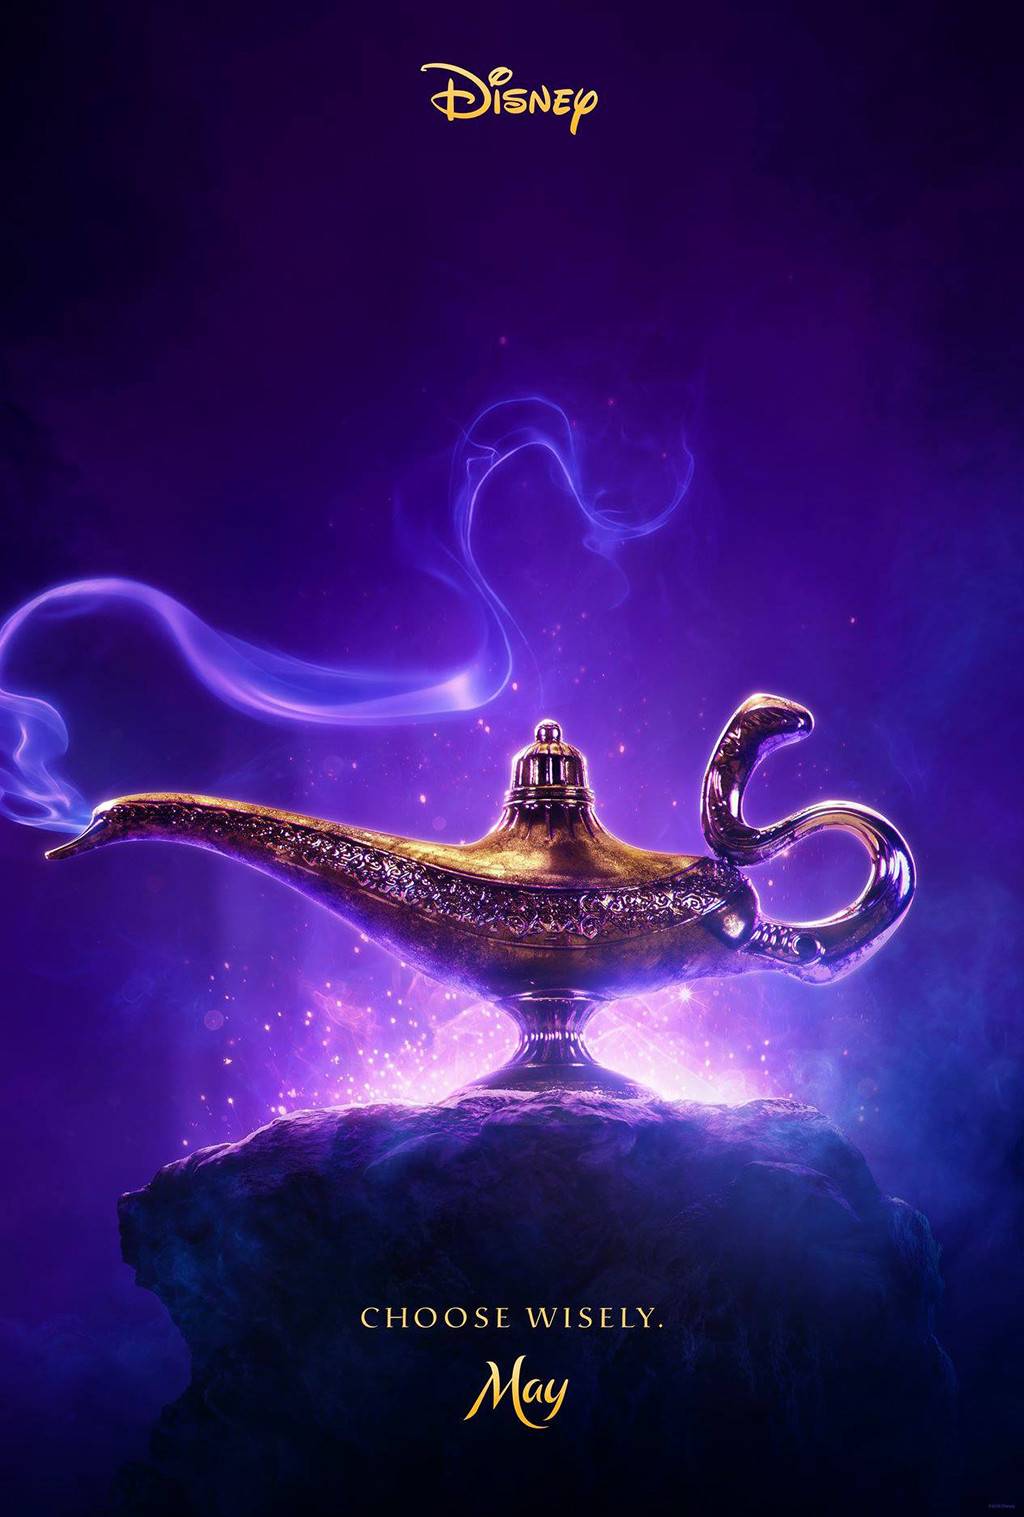 Take a Look at the First Live-Action Teaser Trailer for 'Aladdin'